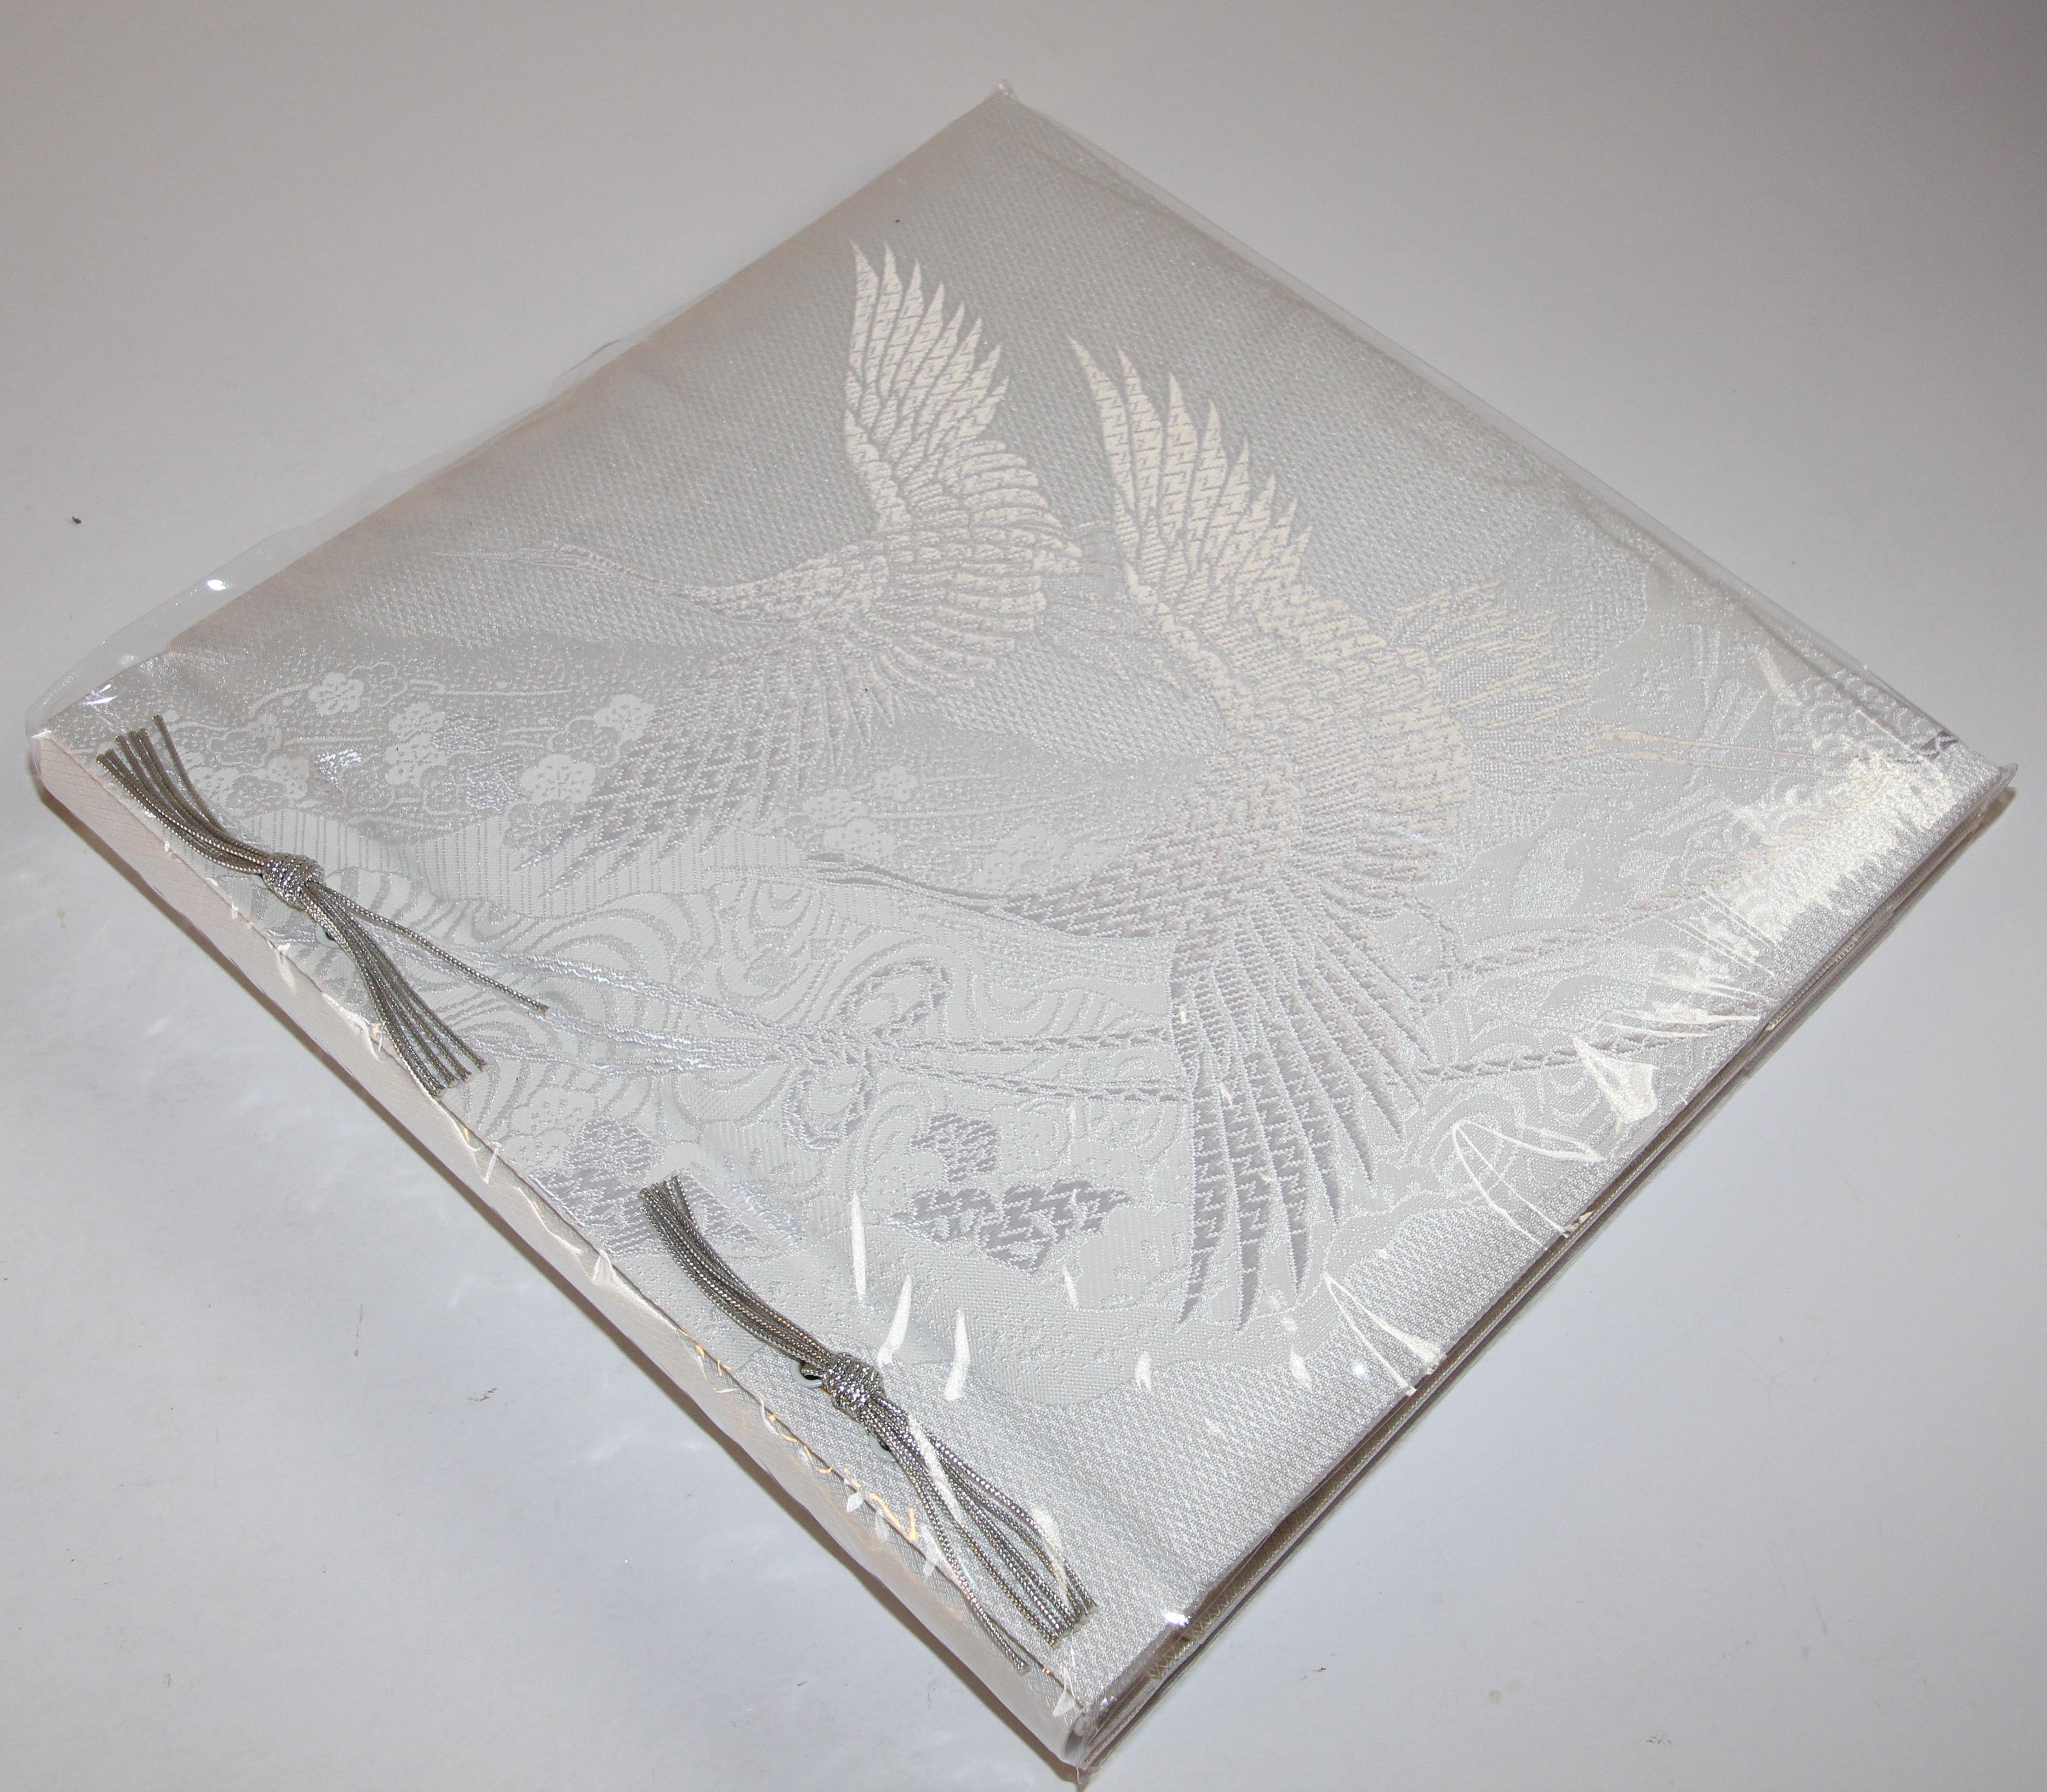 Japanese Kokuyo white and silver silk embroidery photo album.
Beautiful rich red silk fabric with flying white cranes
Absolutely beautiful vintage wedding day album by Japanese company 